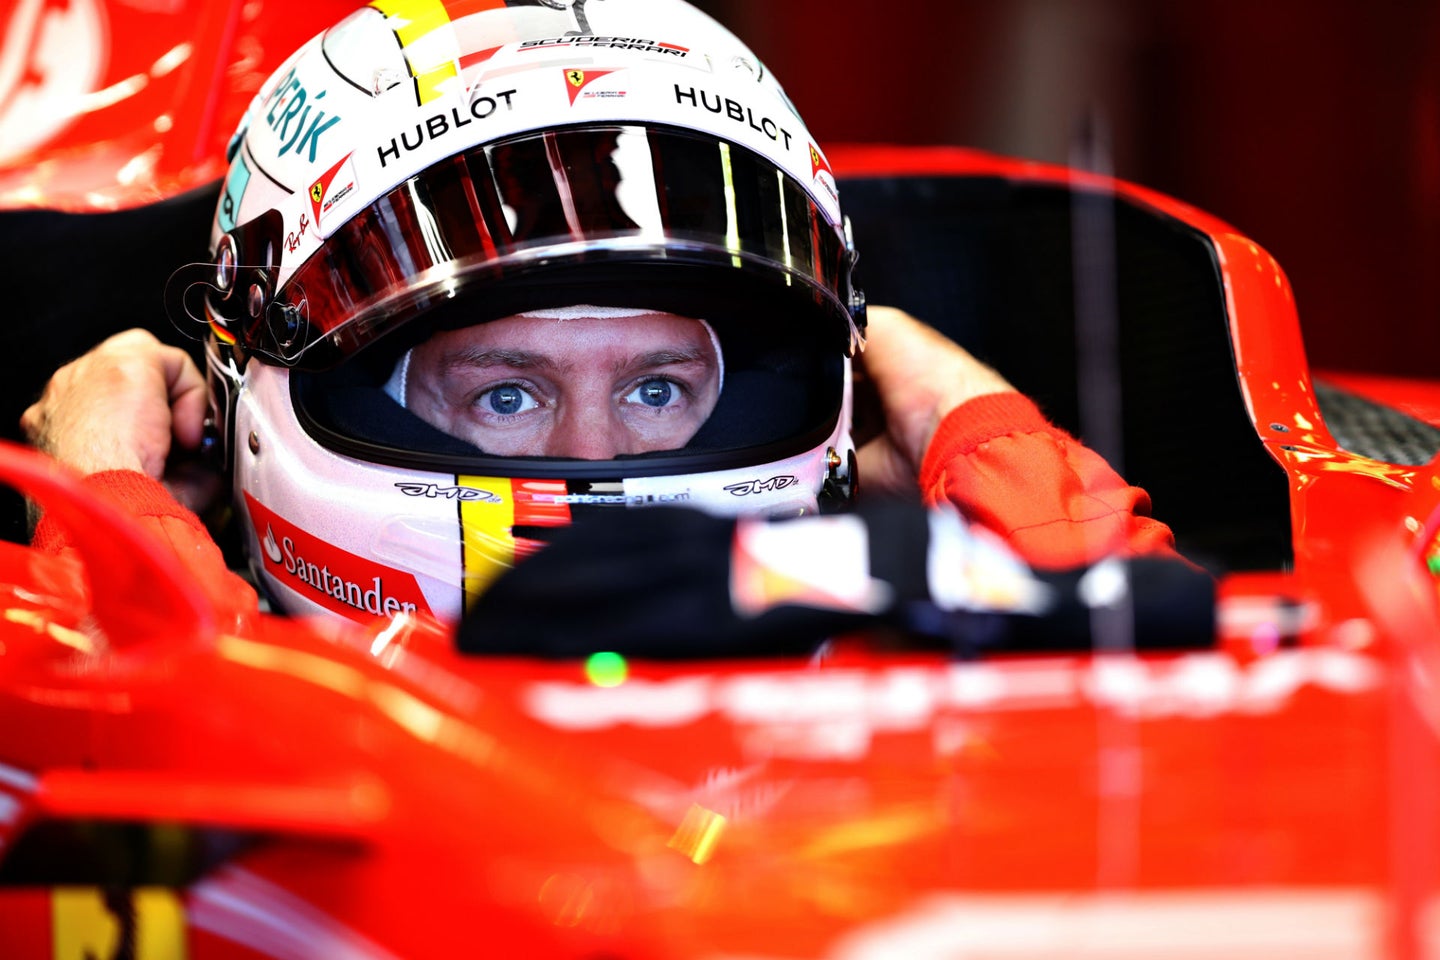 Vettel Captures Pole Position in Hungarian Grand Prix Qualifying